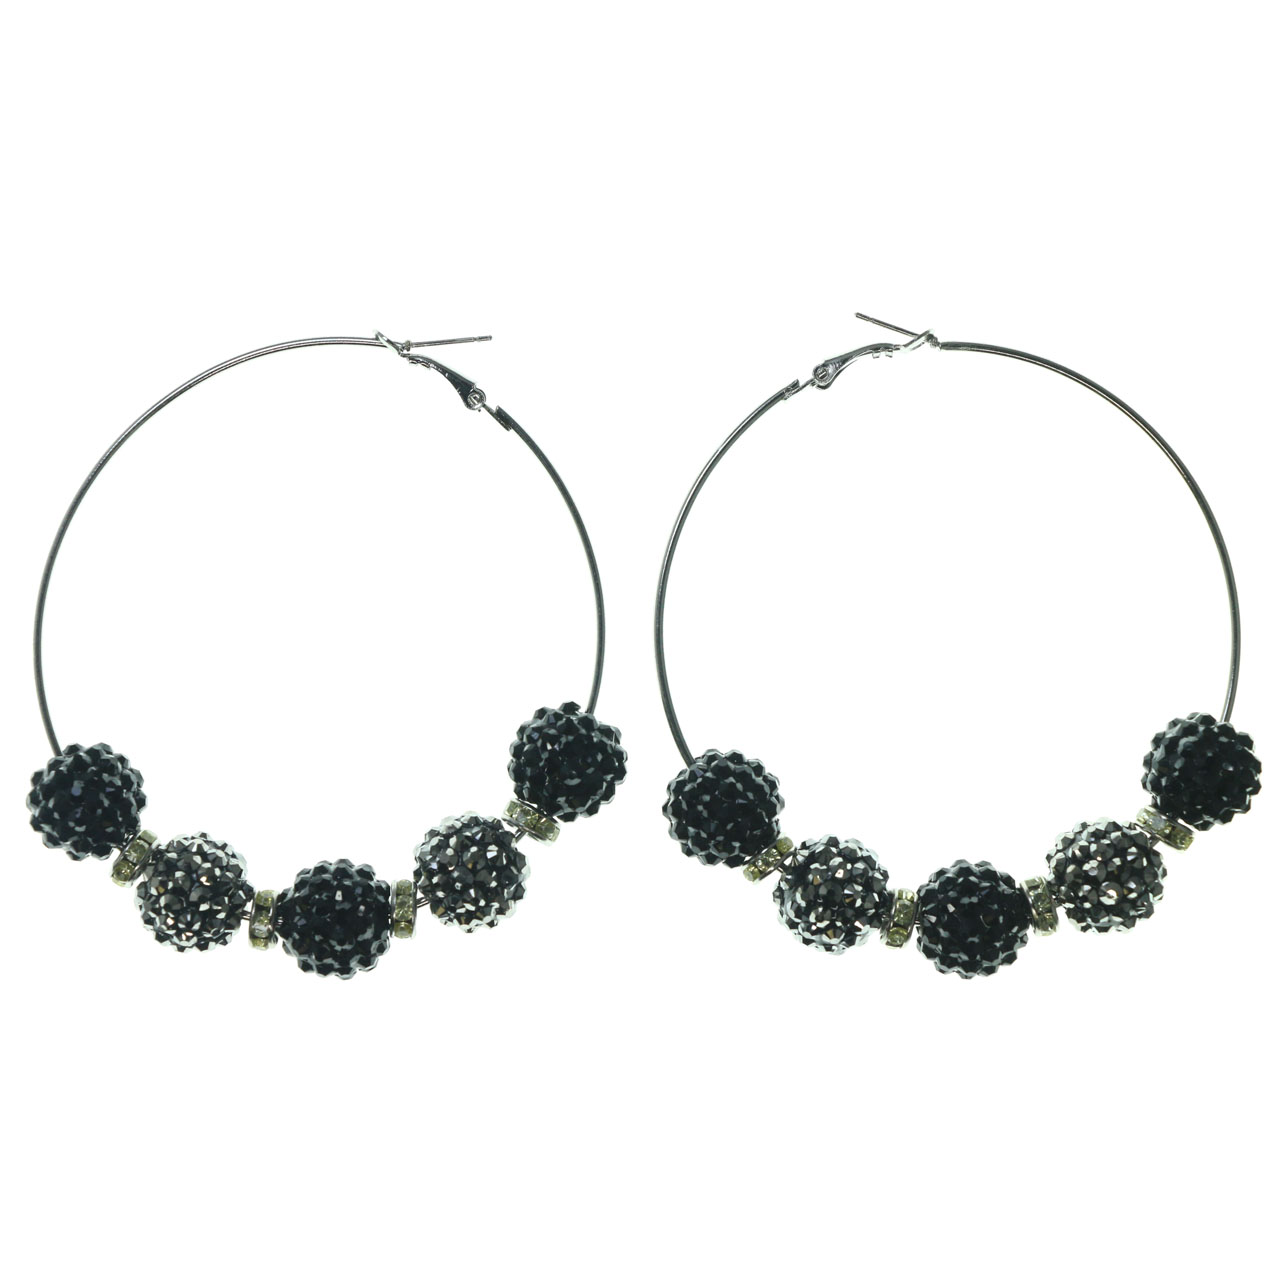 MI AMORE Large Hoop Earrings Various Style Ball Black & White Crystal Accents